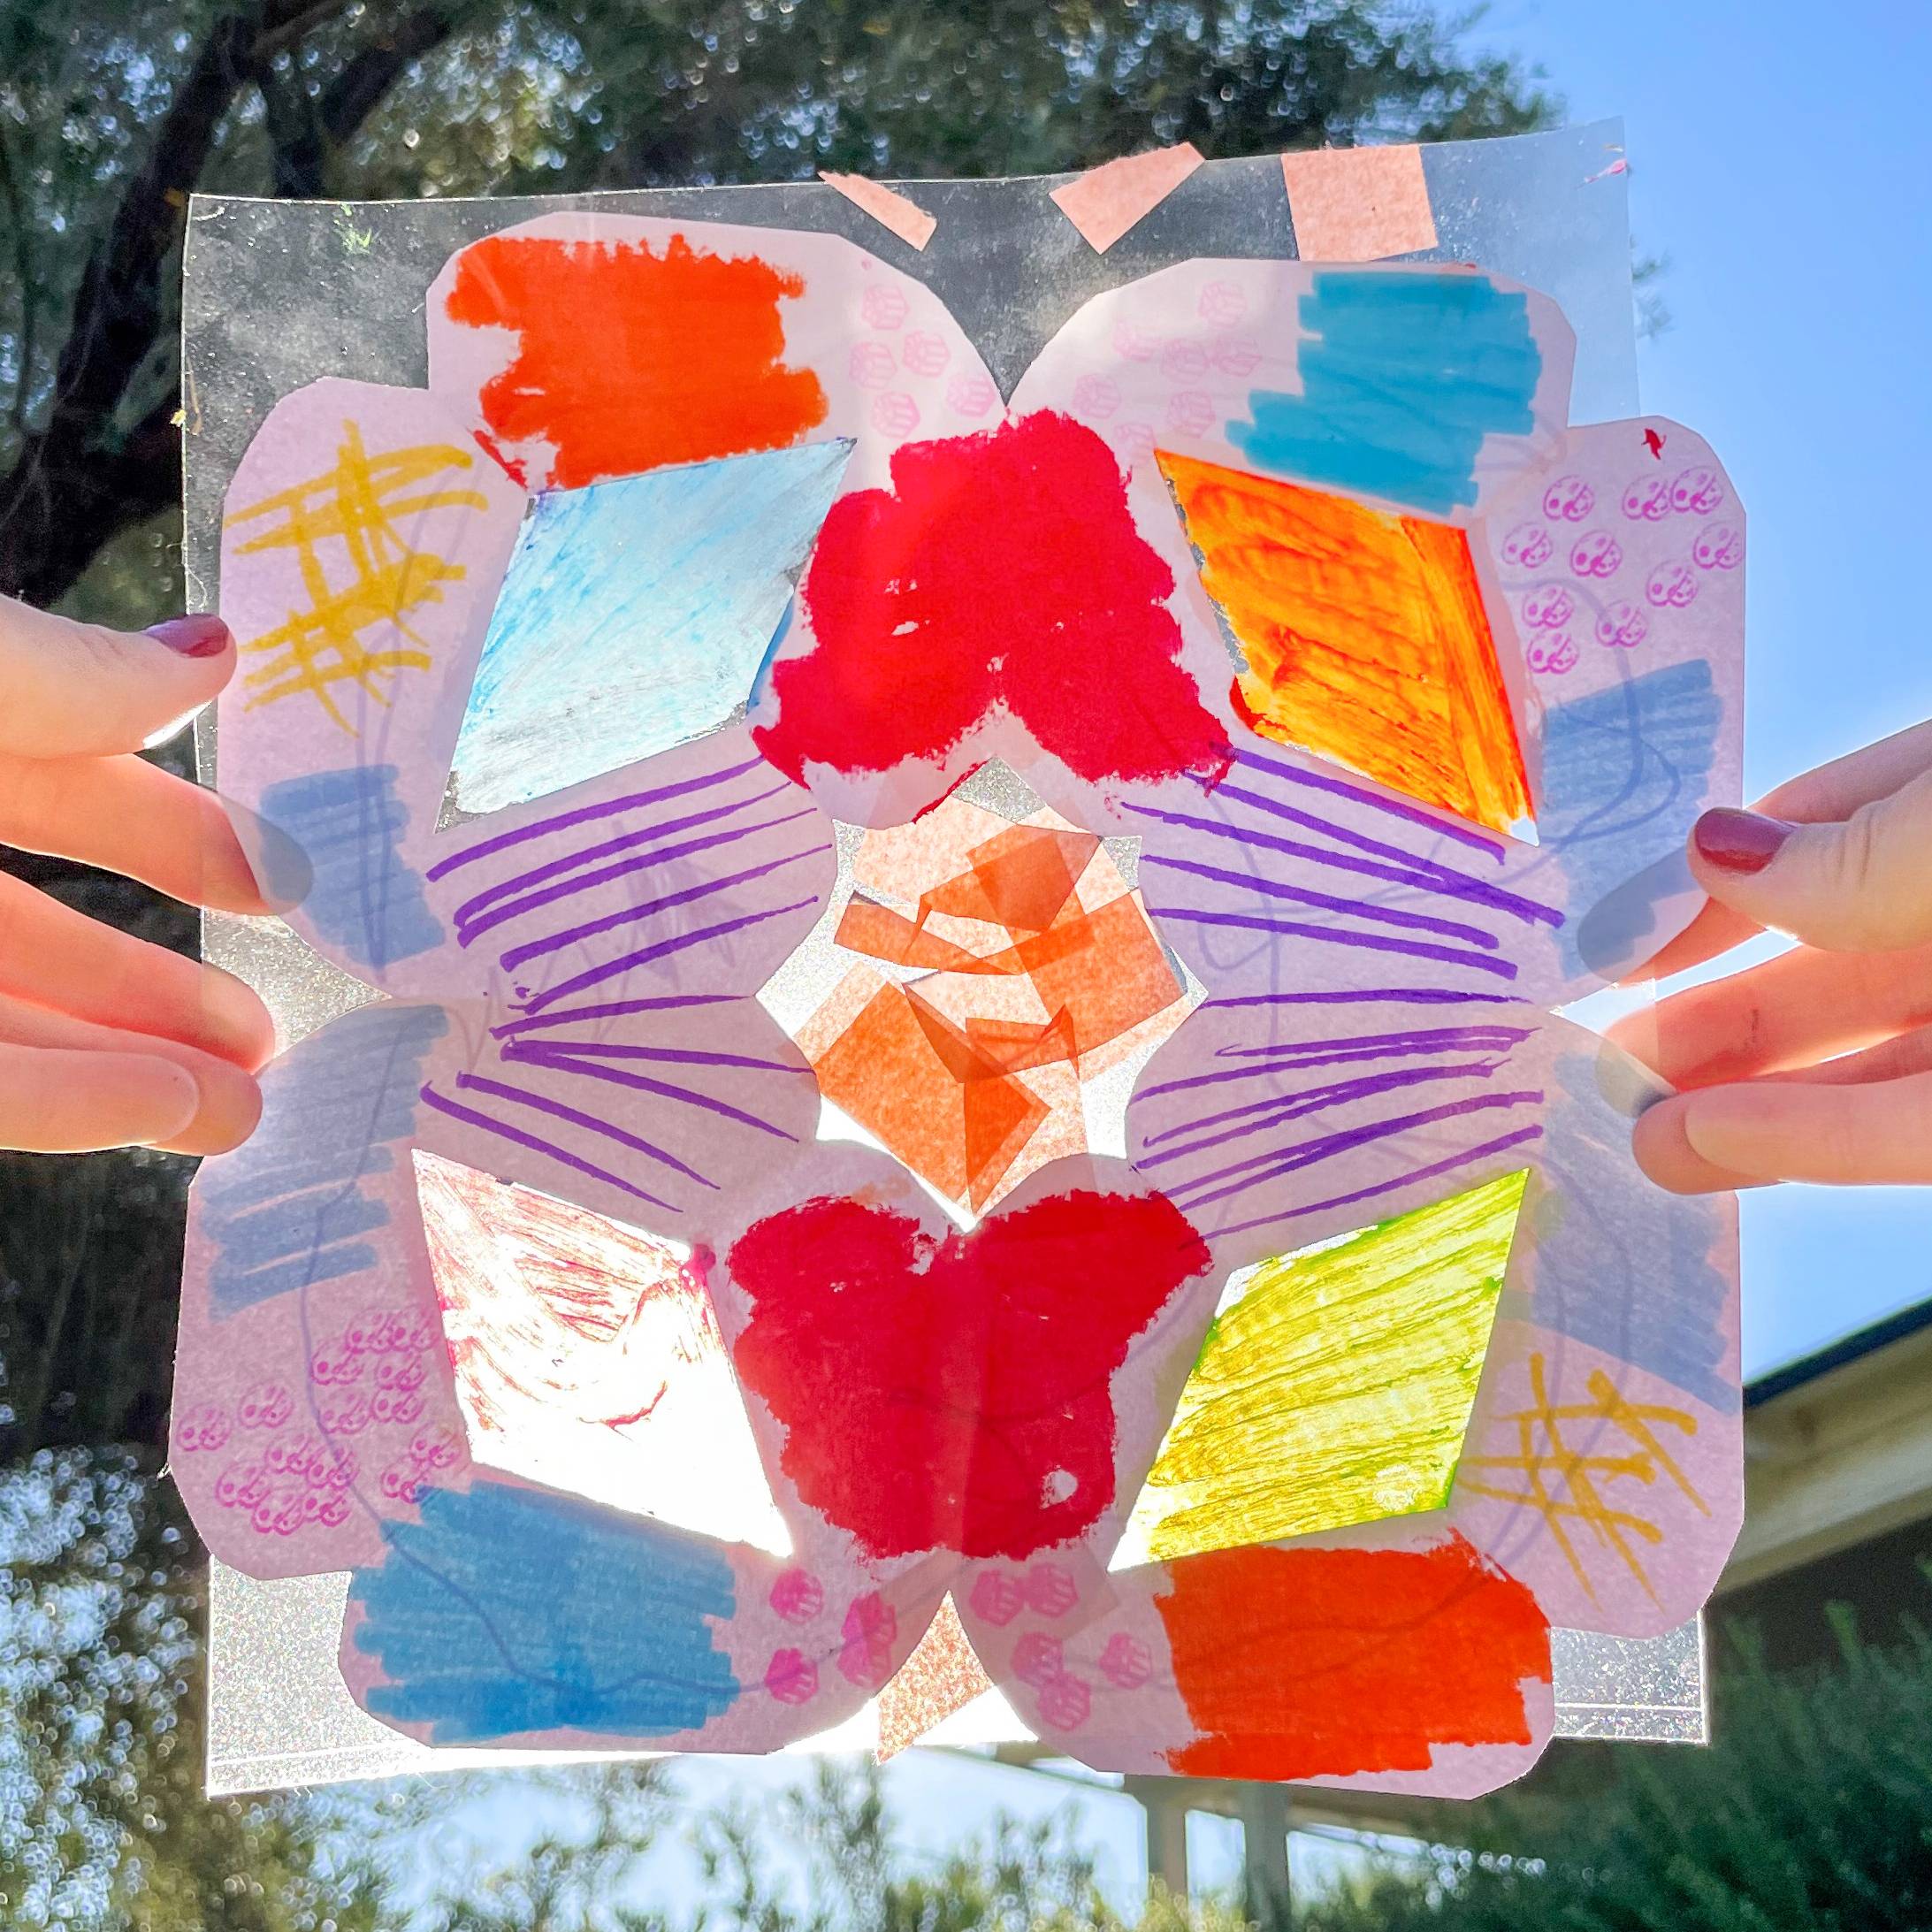 Snowflake suncatcher being held in front of the sun